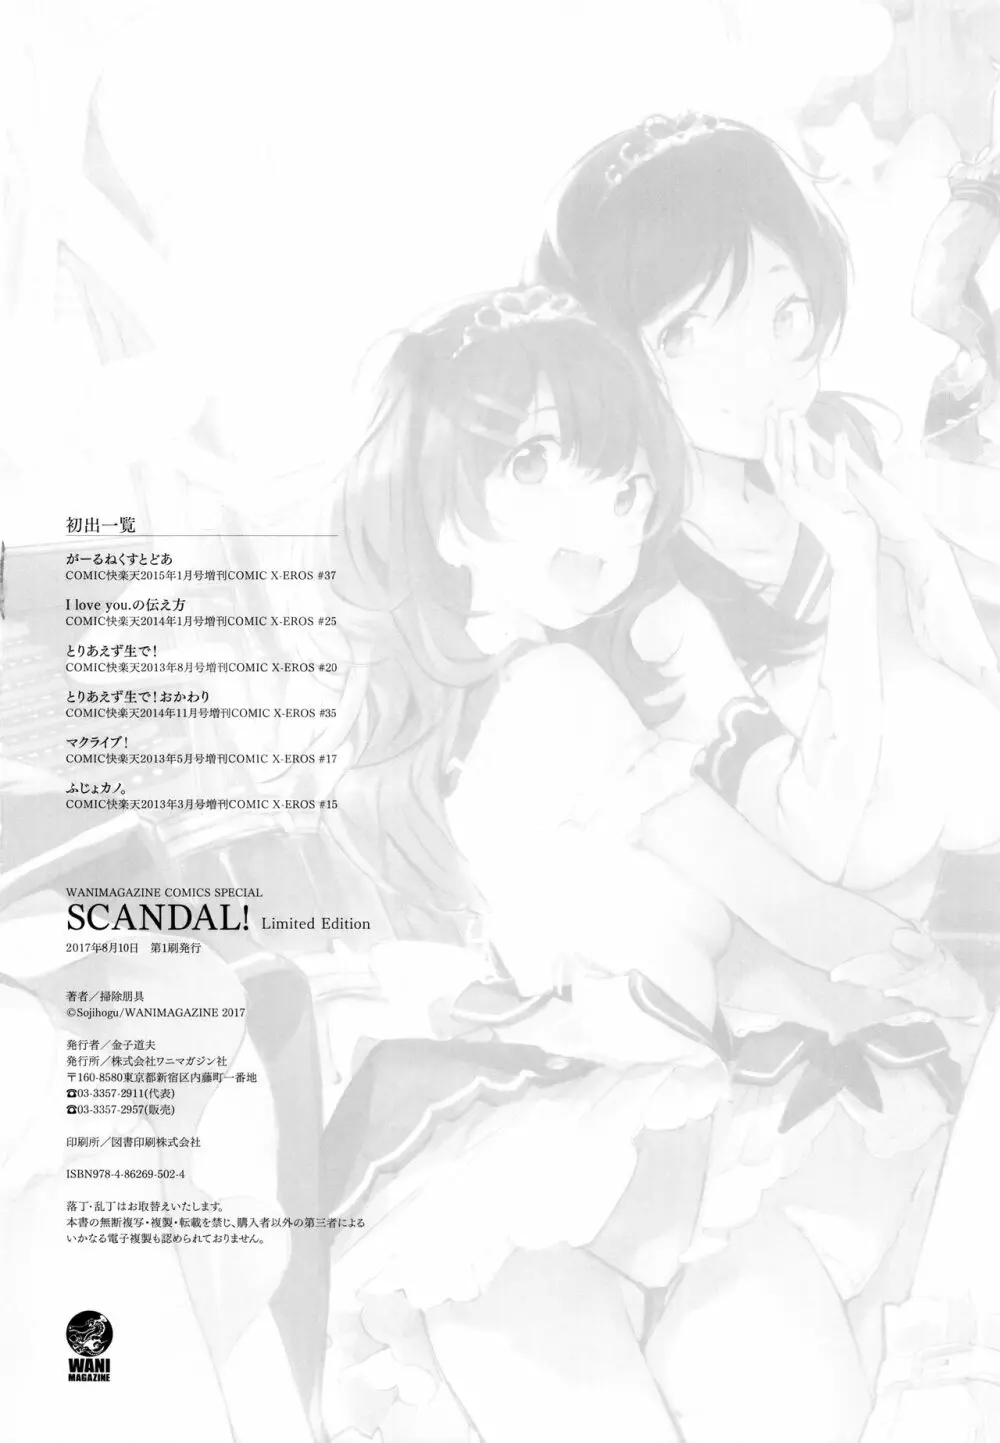 SCANDAL! Limited Edition 157ページ